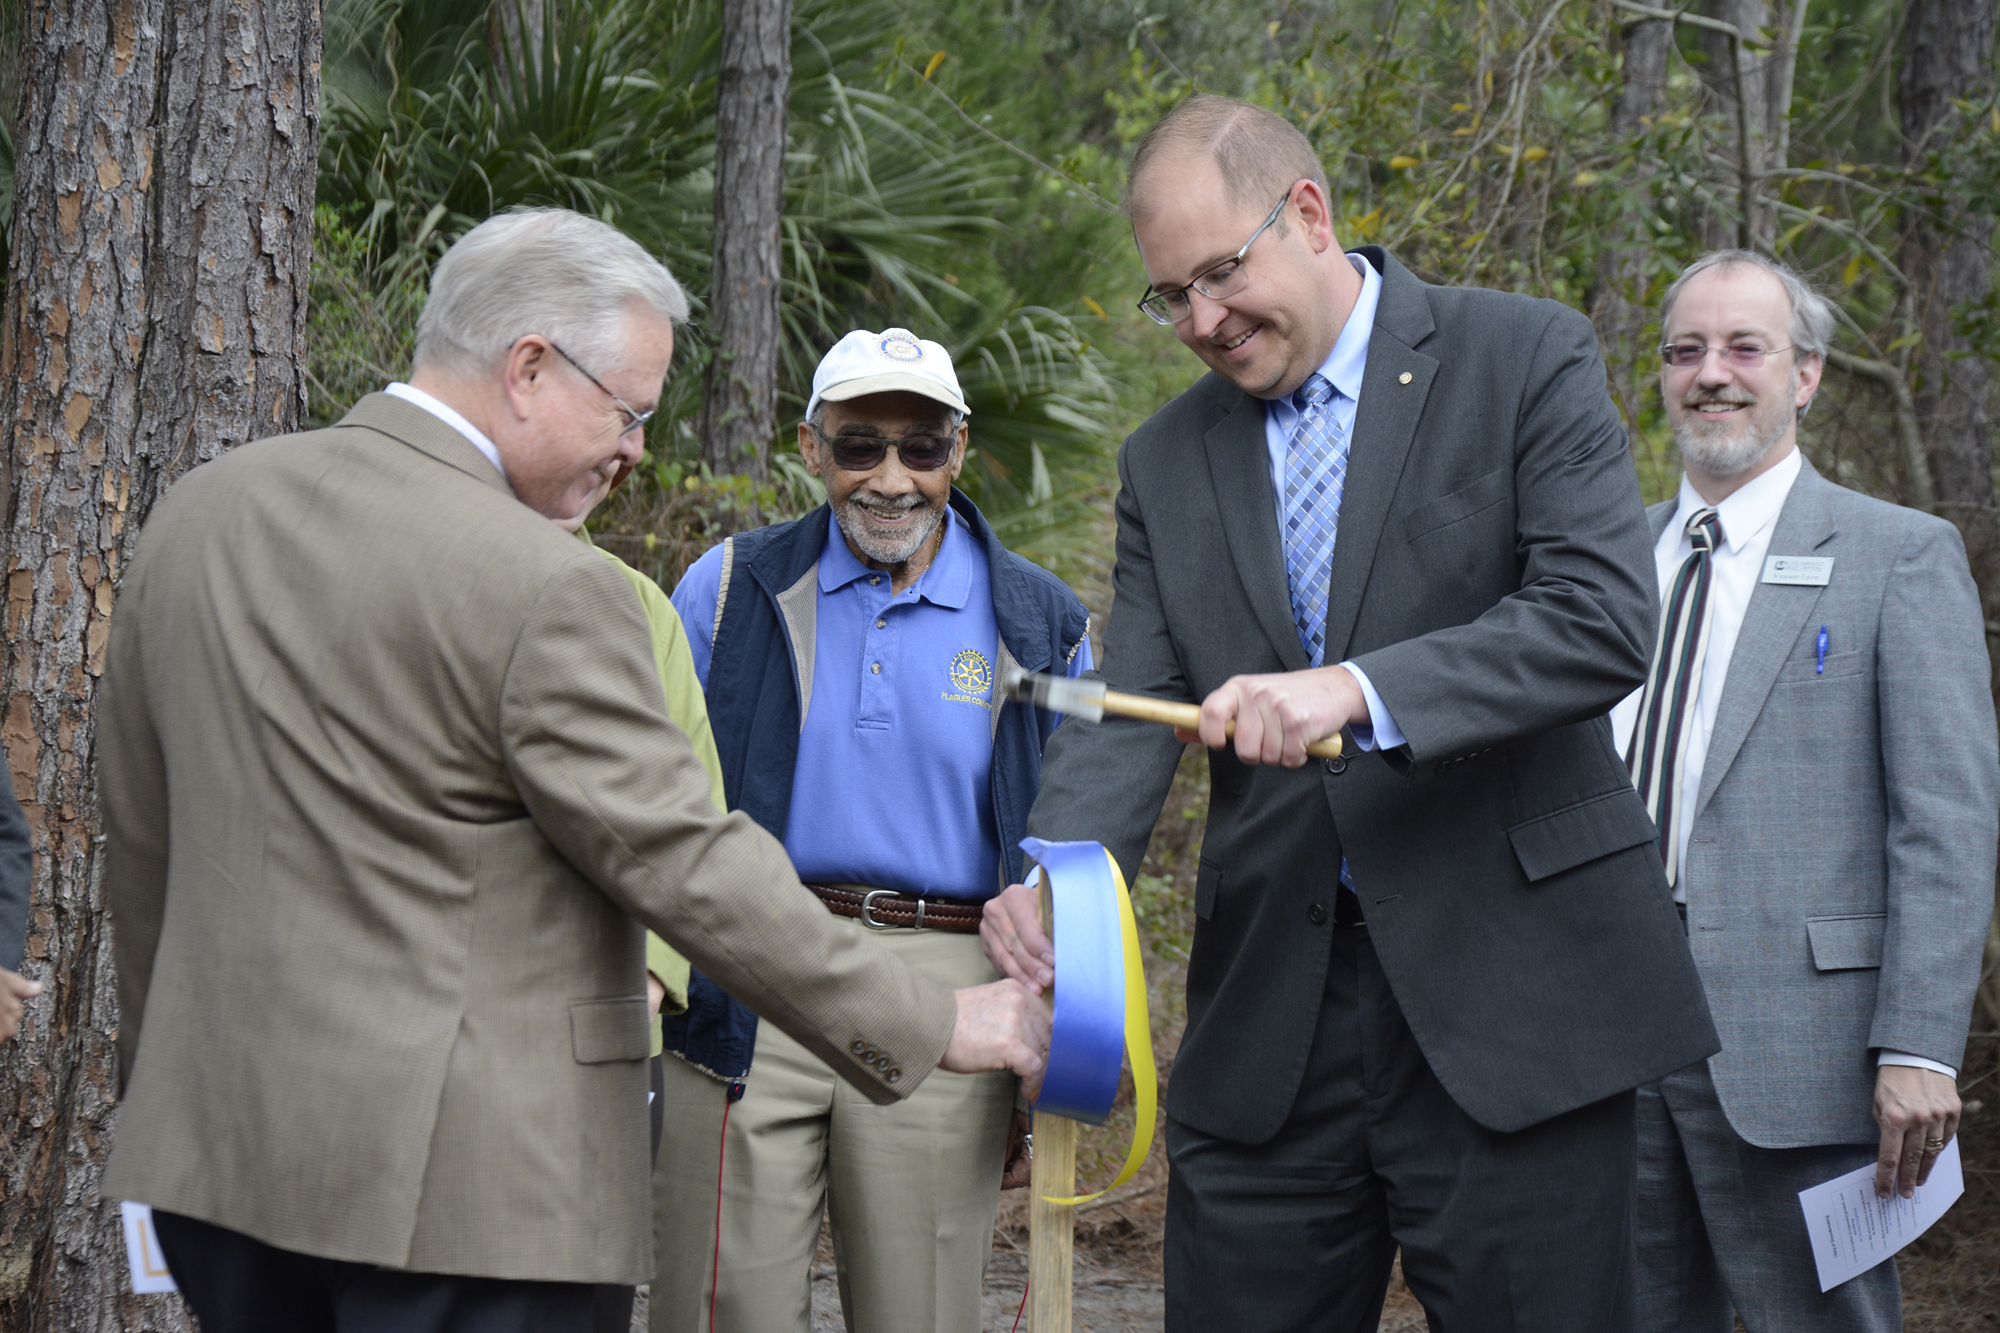 The second stake represented the Flagler County Rotary Club and was placed in the ground by current Flagler Rotary Club President Matt Maxwell.